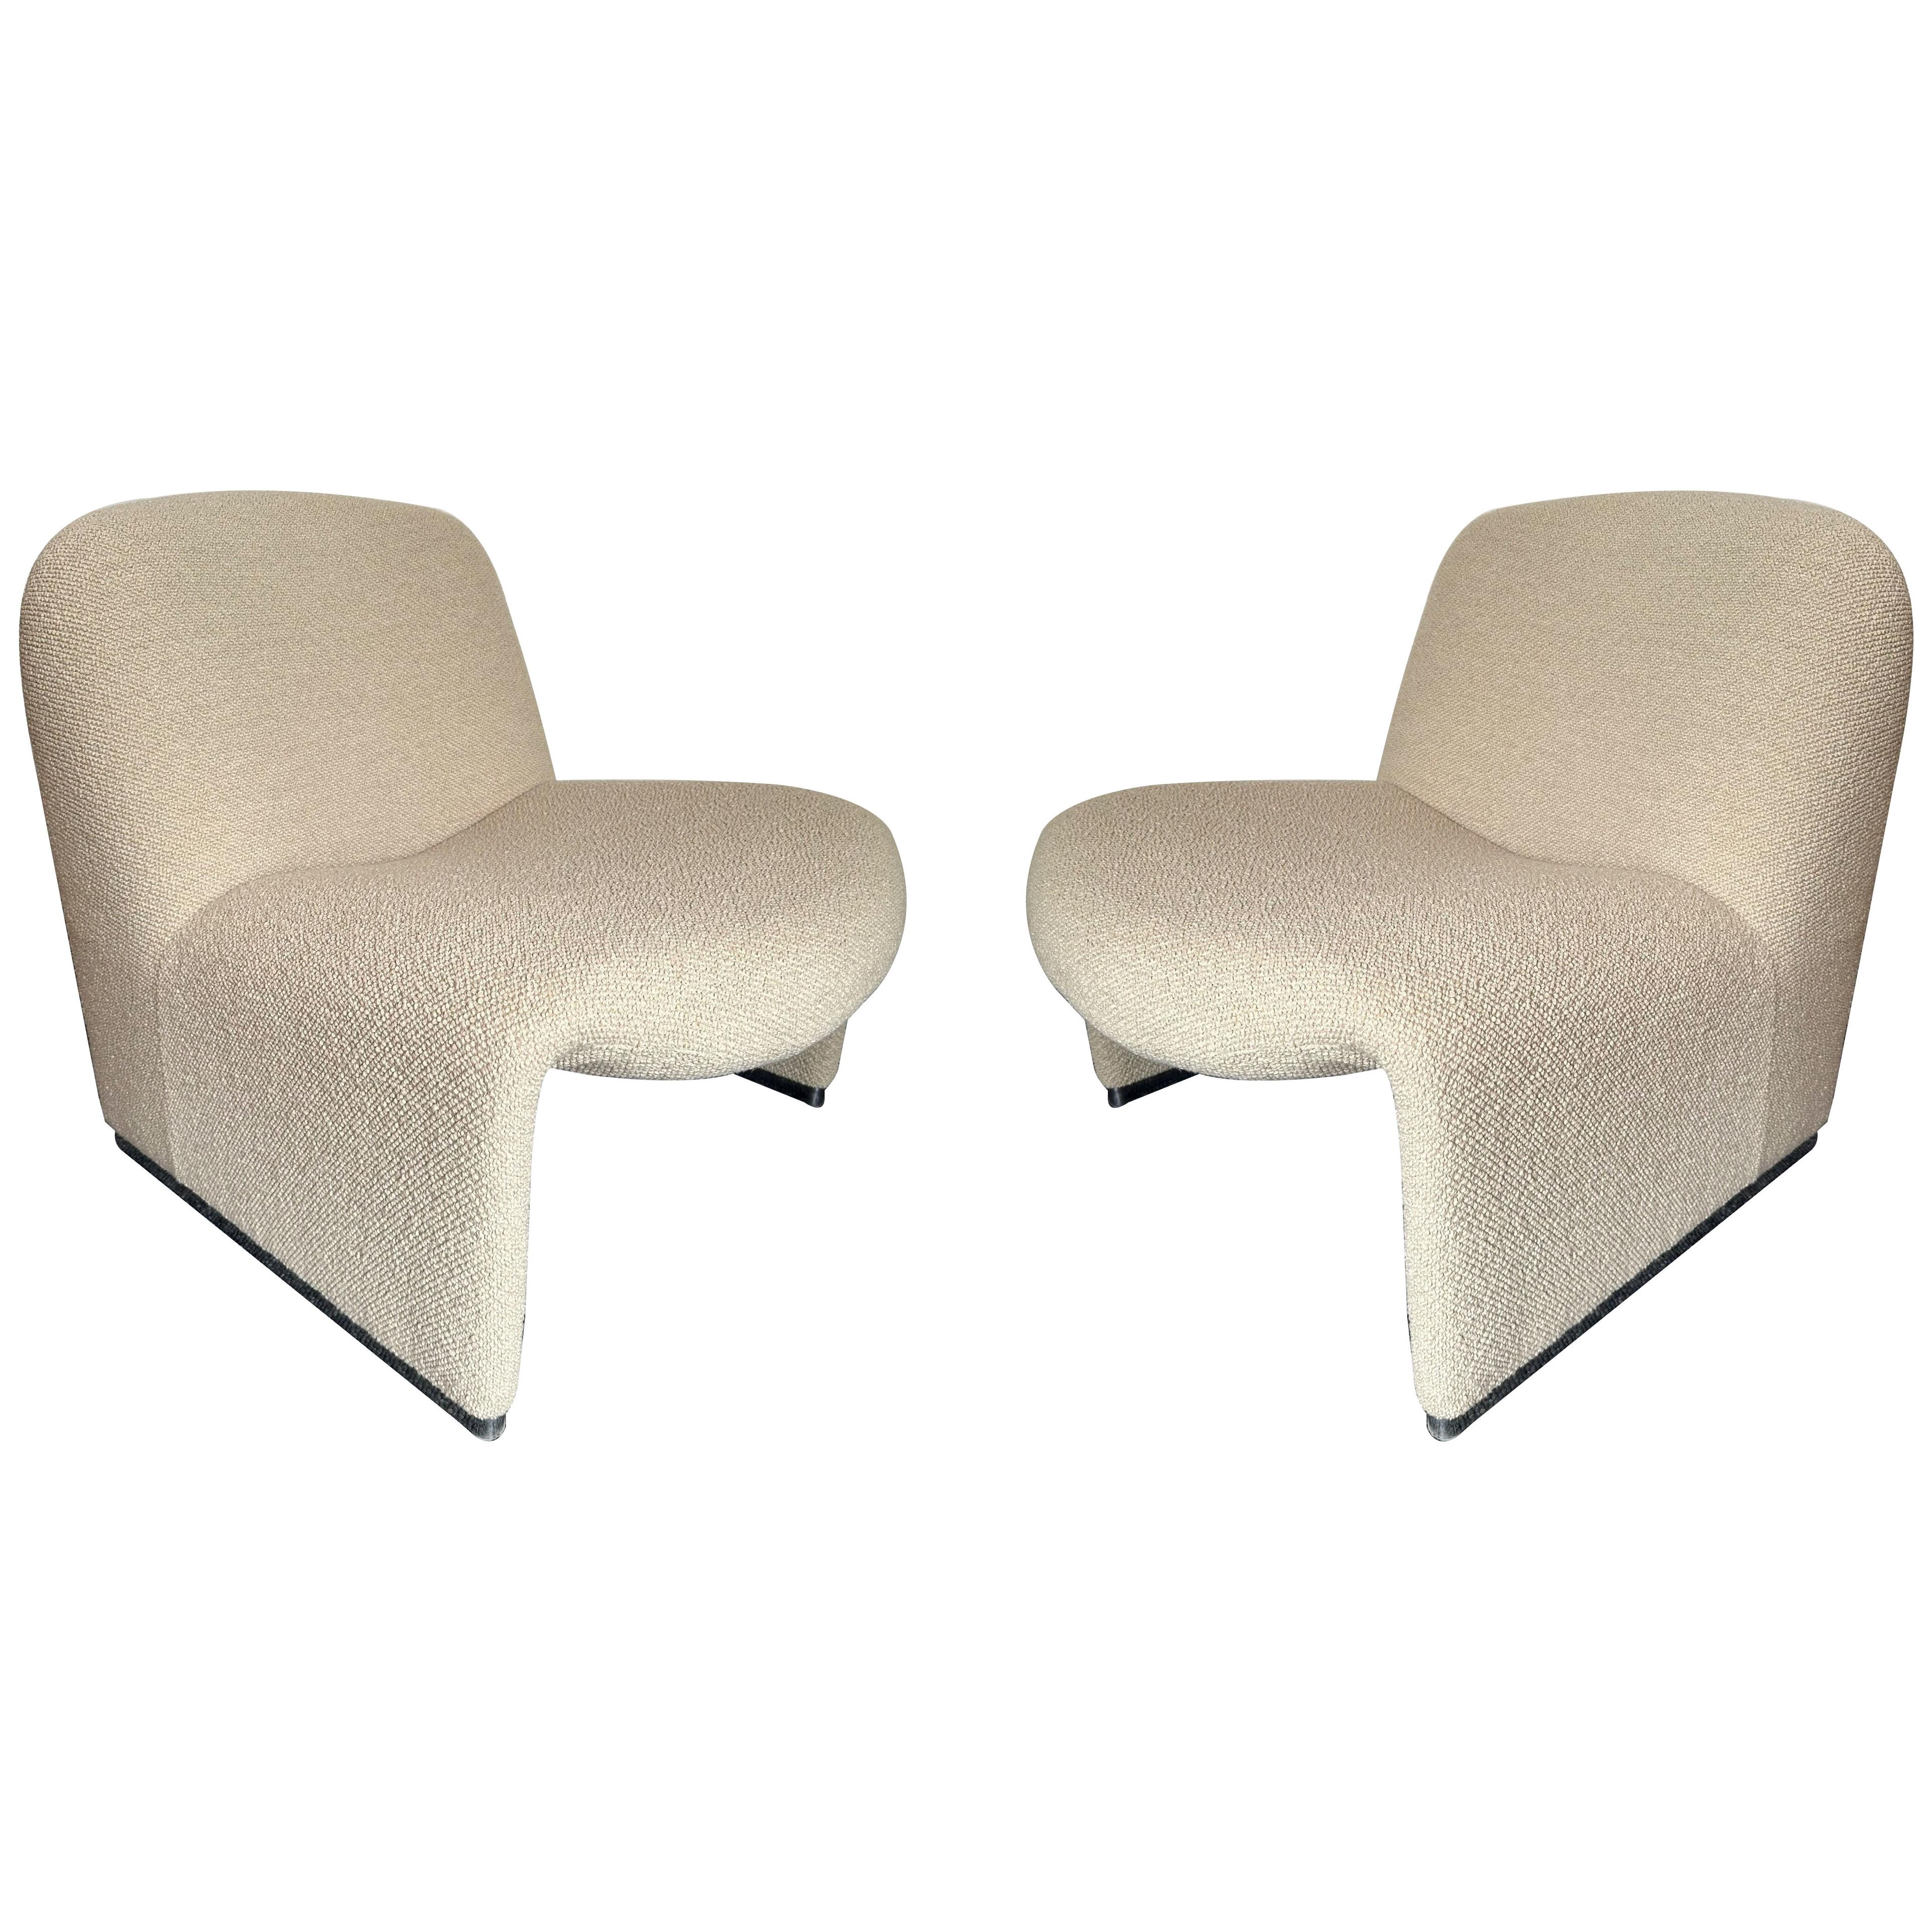 Pair of Slipper Chairs Alky Bouclé Fabric by Giancarlo Piretti, Italy, 1970s